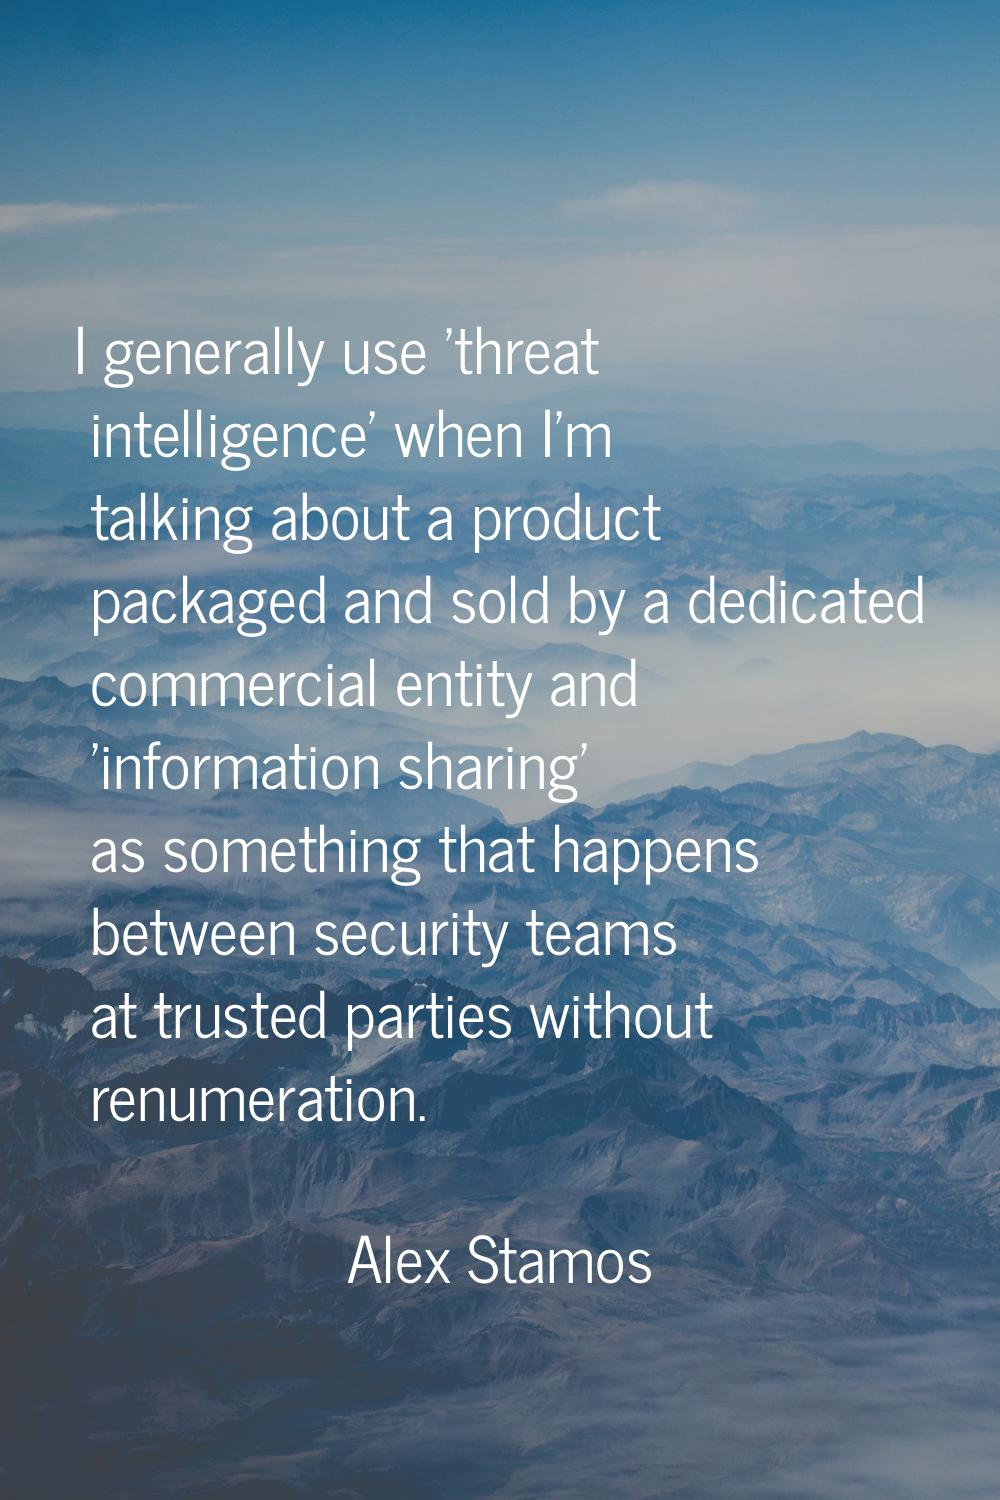 I generally use 'threat intelligence' when I'm talking about a product packaged and sold by a dedic